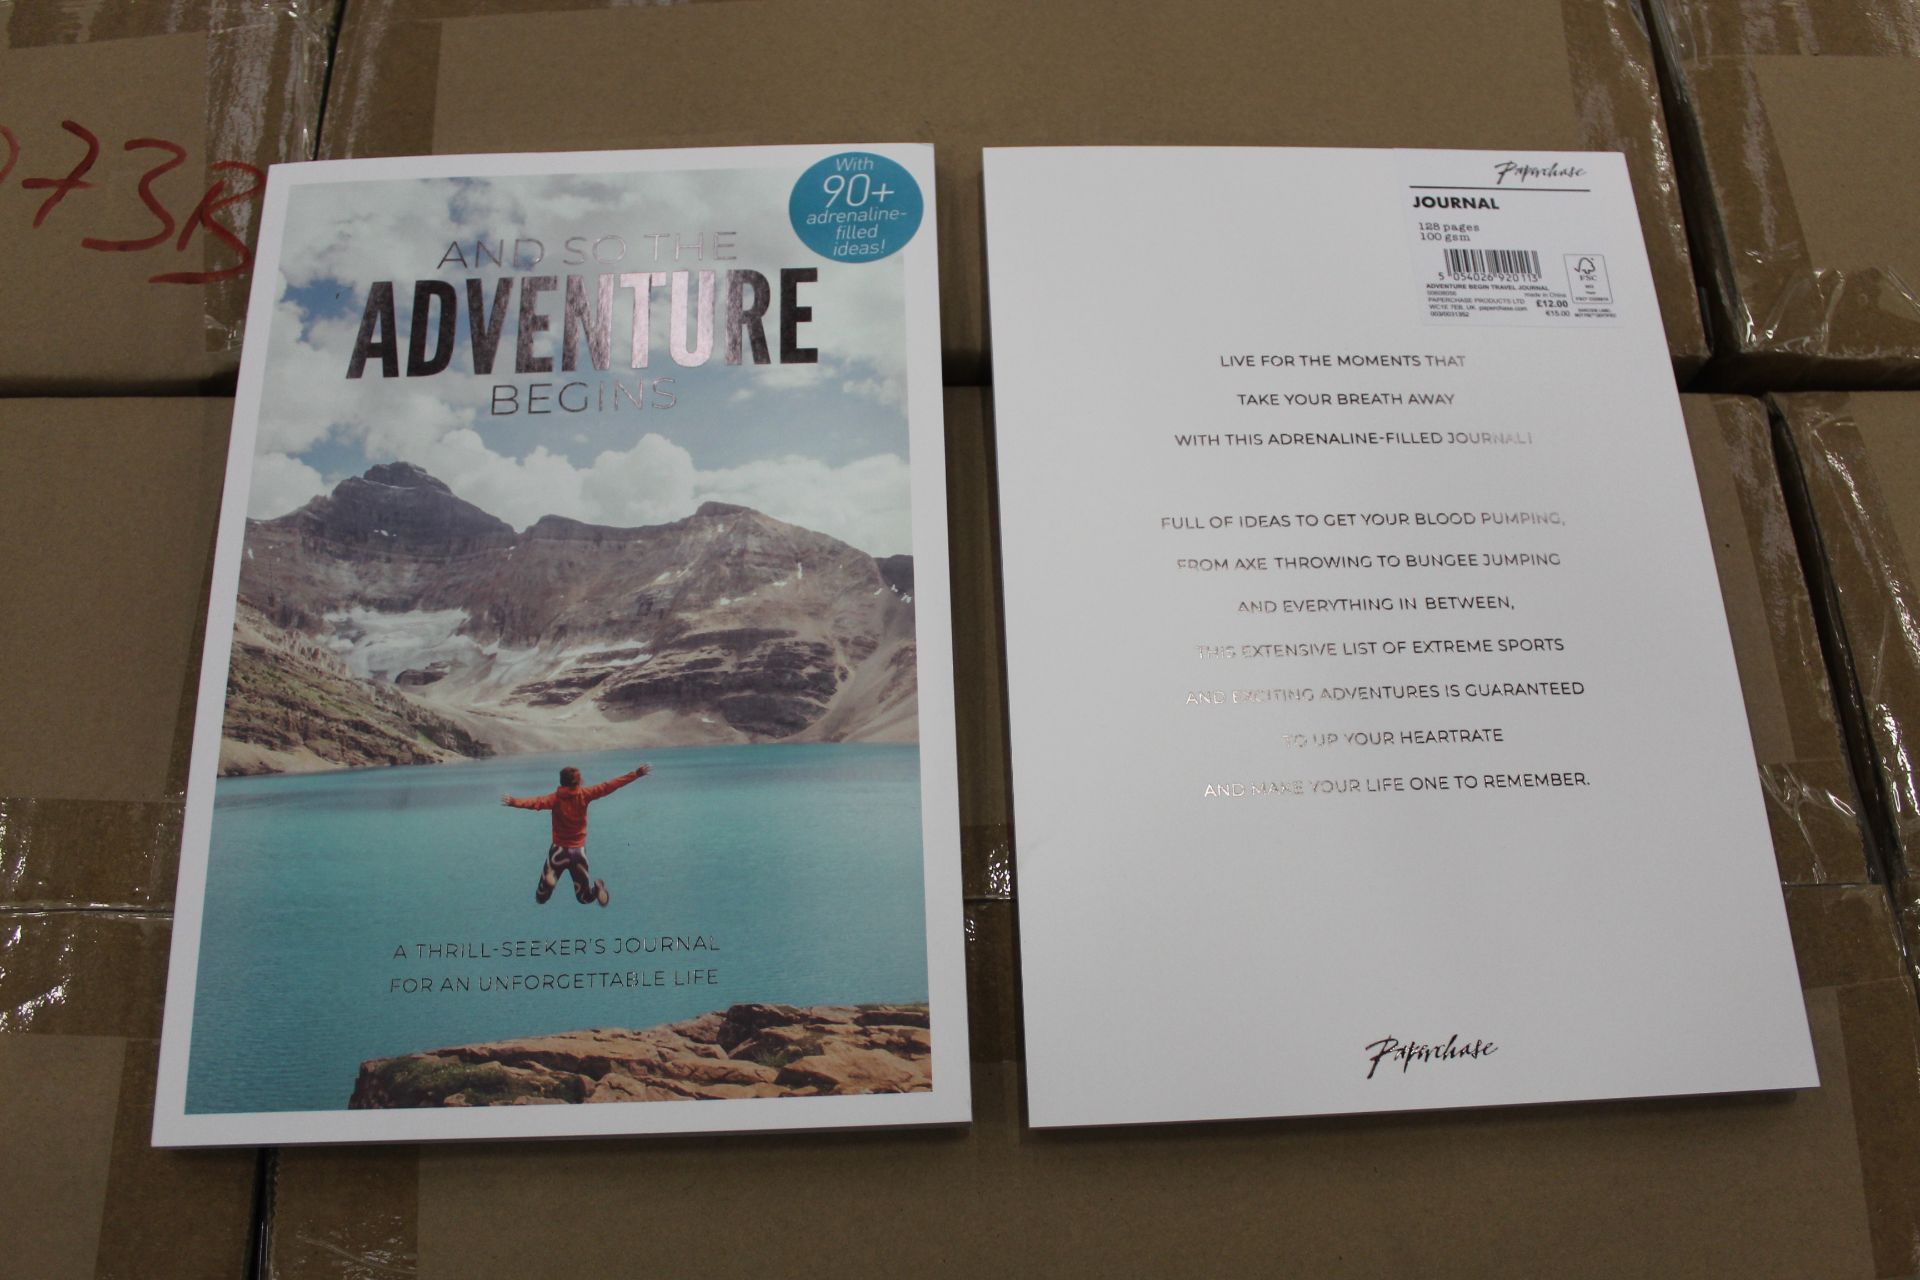 1200x Adventure Begin Travel Journal Total Retail: £14400 (Stationery) (1PE073B) - Image 2 of 2